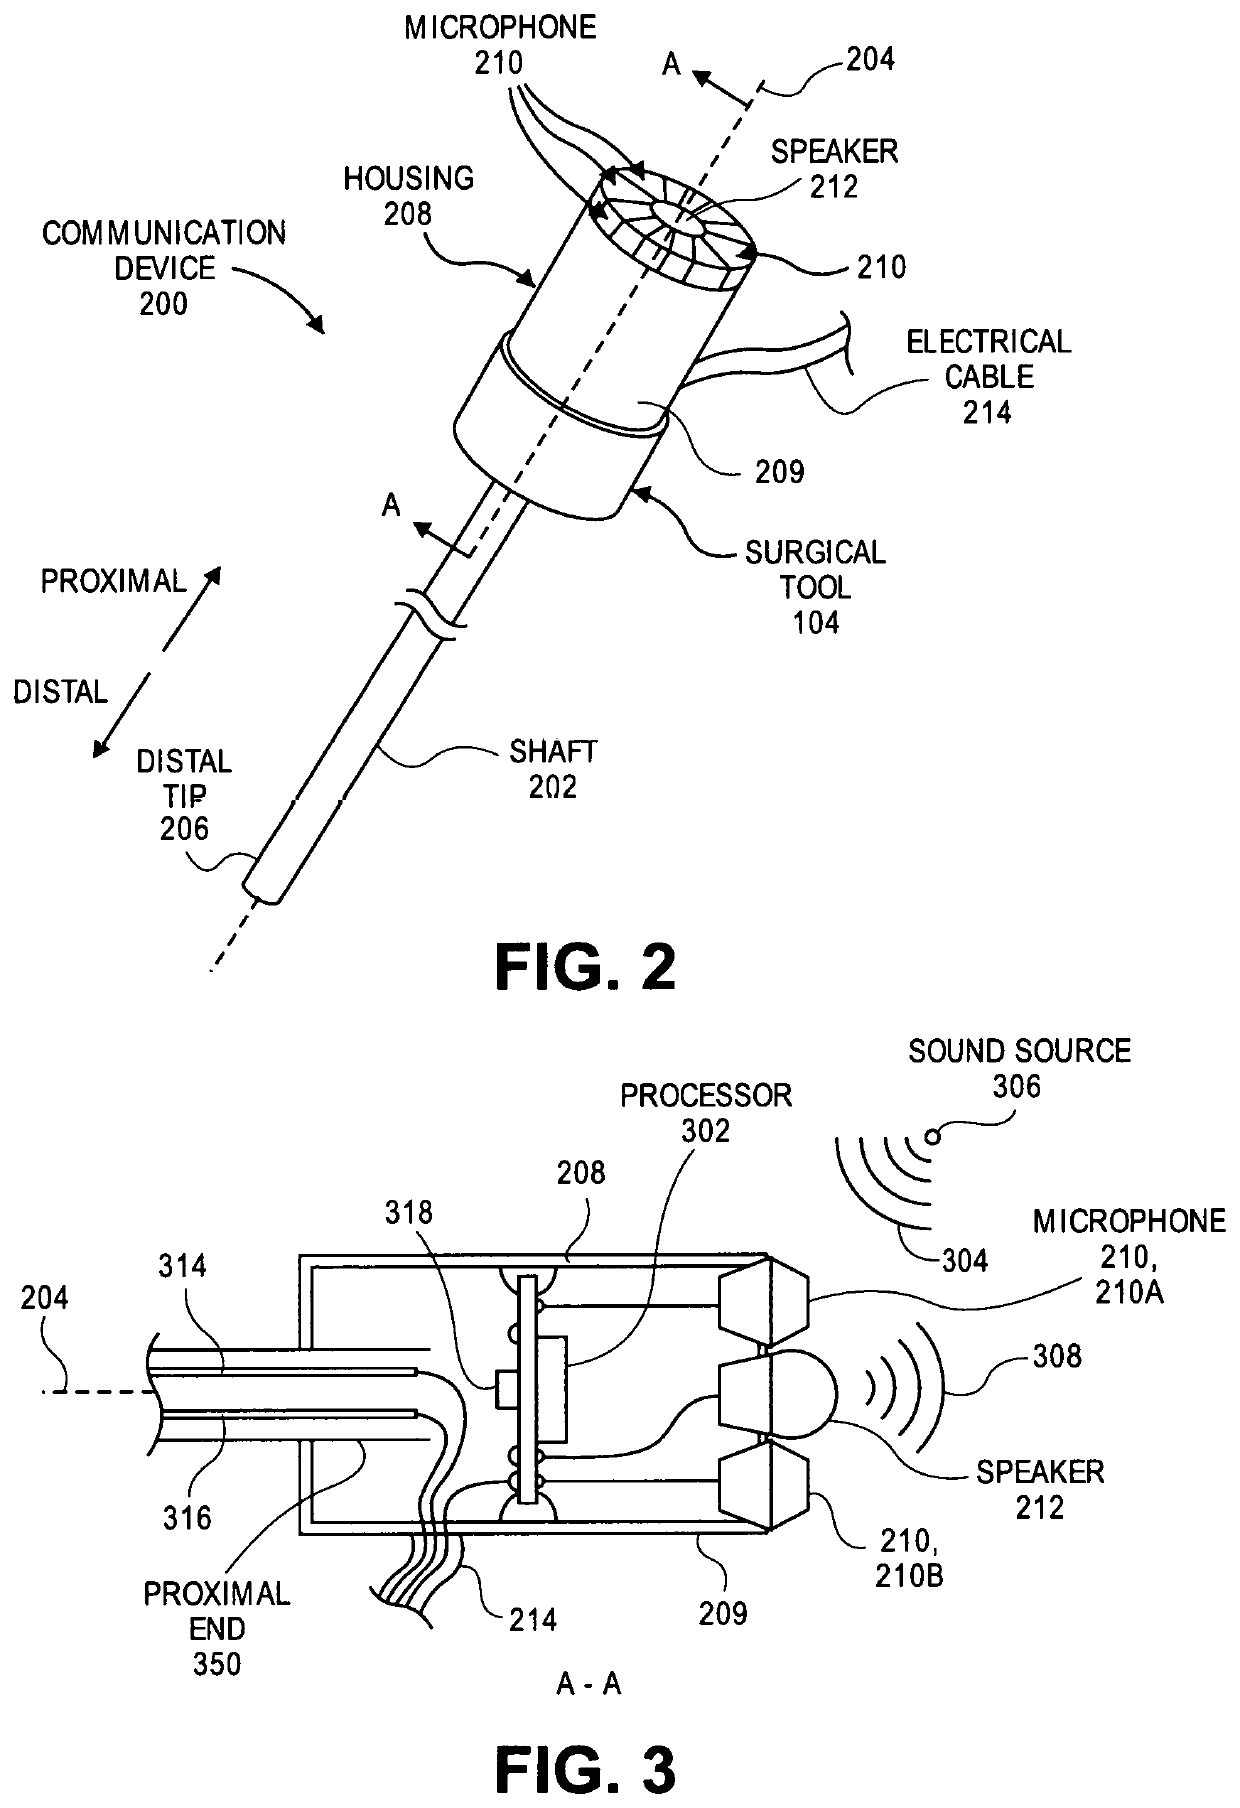 Surgical tool having integrated microphones